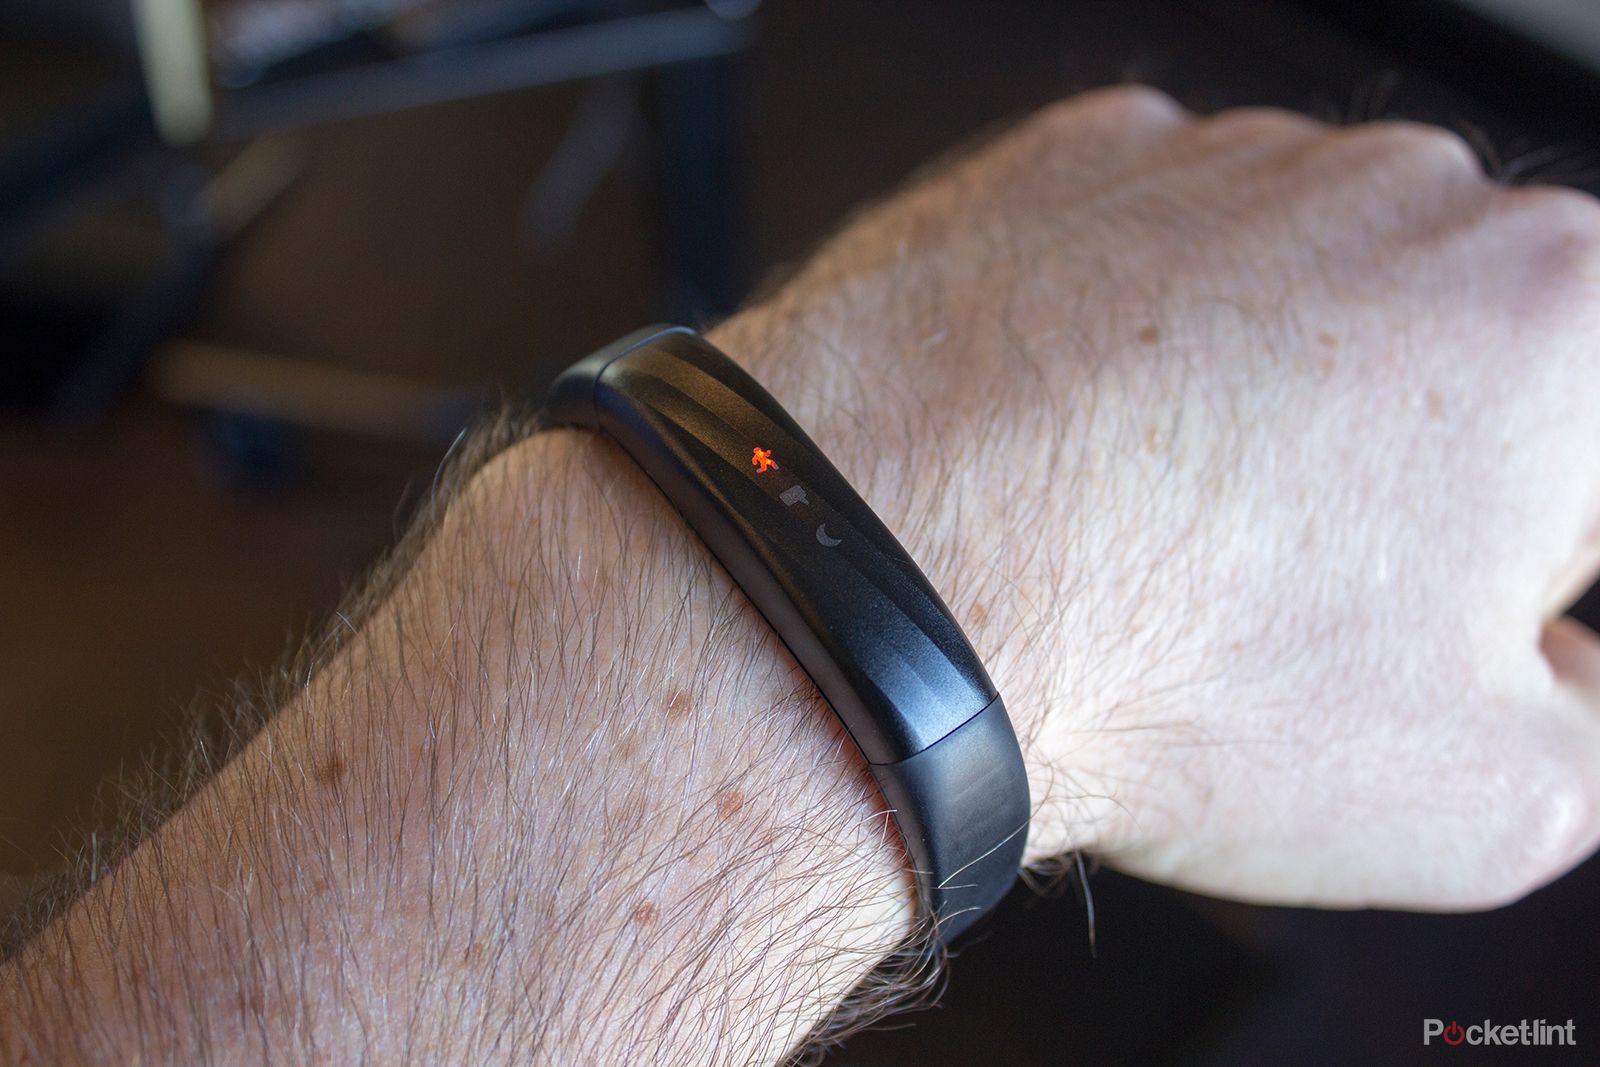 jawbone up3 with hr monitor plus budget up move model unveiled image 1